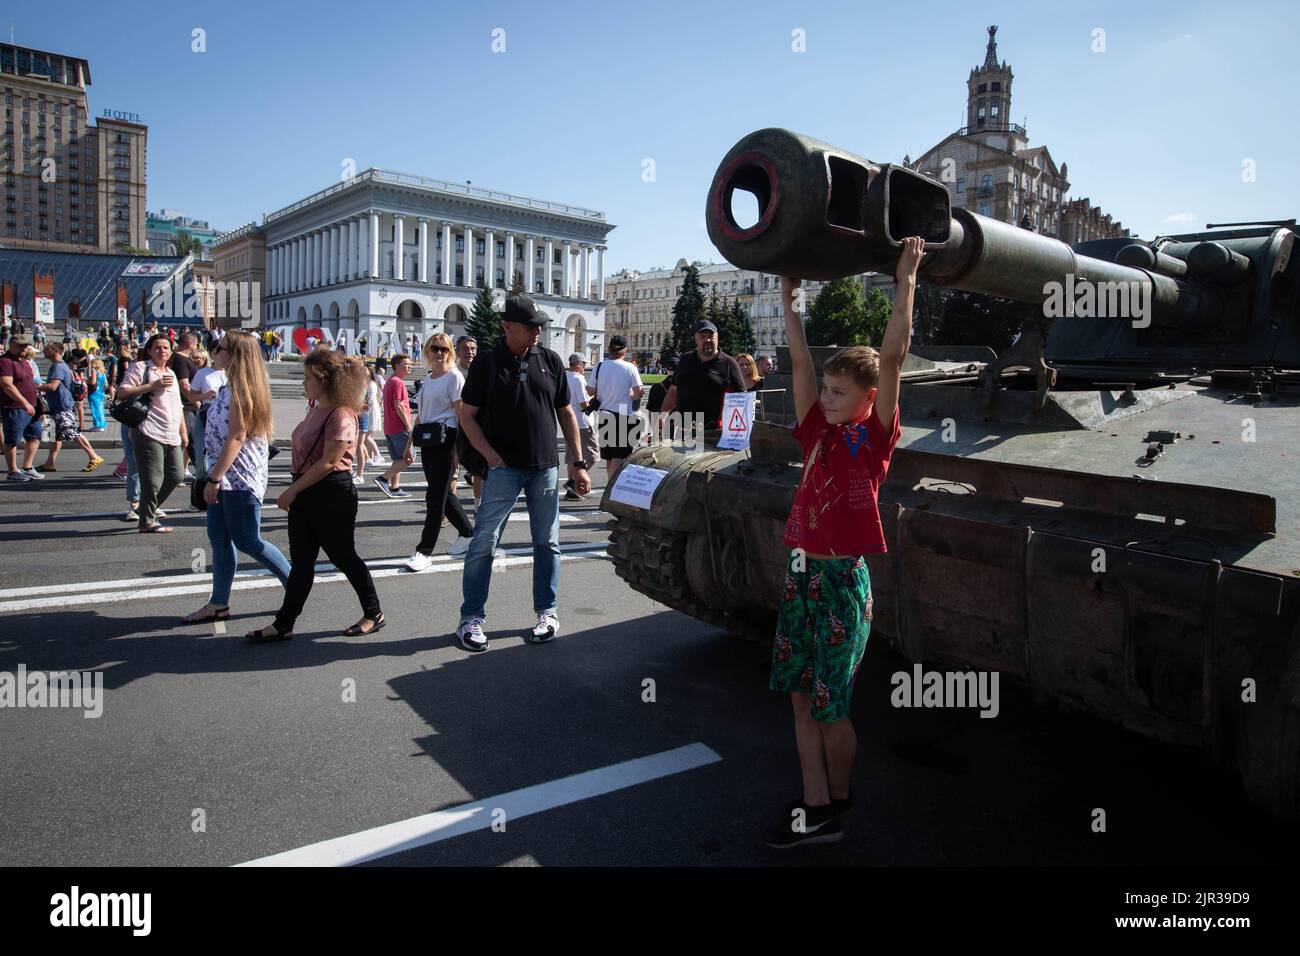 A boy hangs on the cannon of a destroyed Russian tank displayed on the main street Khreshchatyk as part of the upcoming celebration of the Independence Day of Ukraine amid Russia's invasion of Ukraine in central Kyiv. Stock Photo